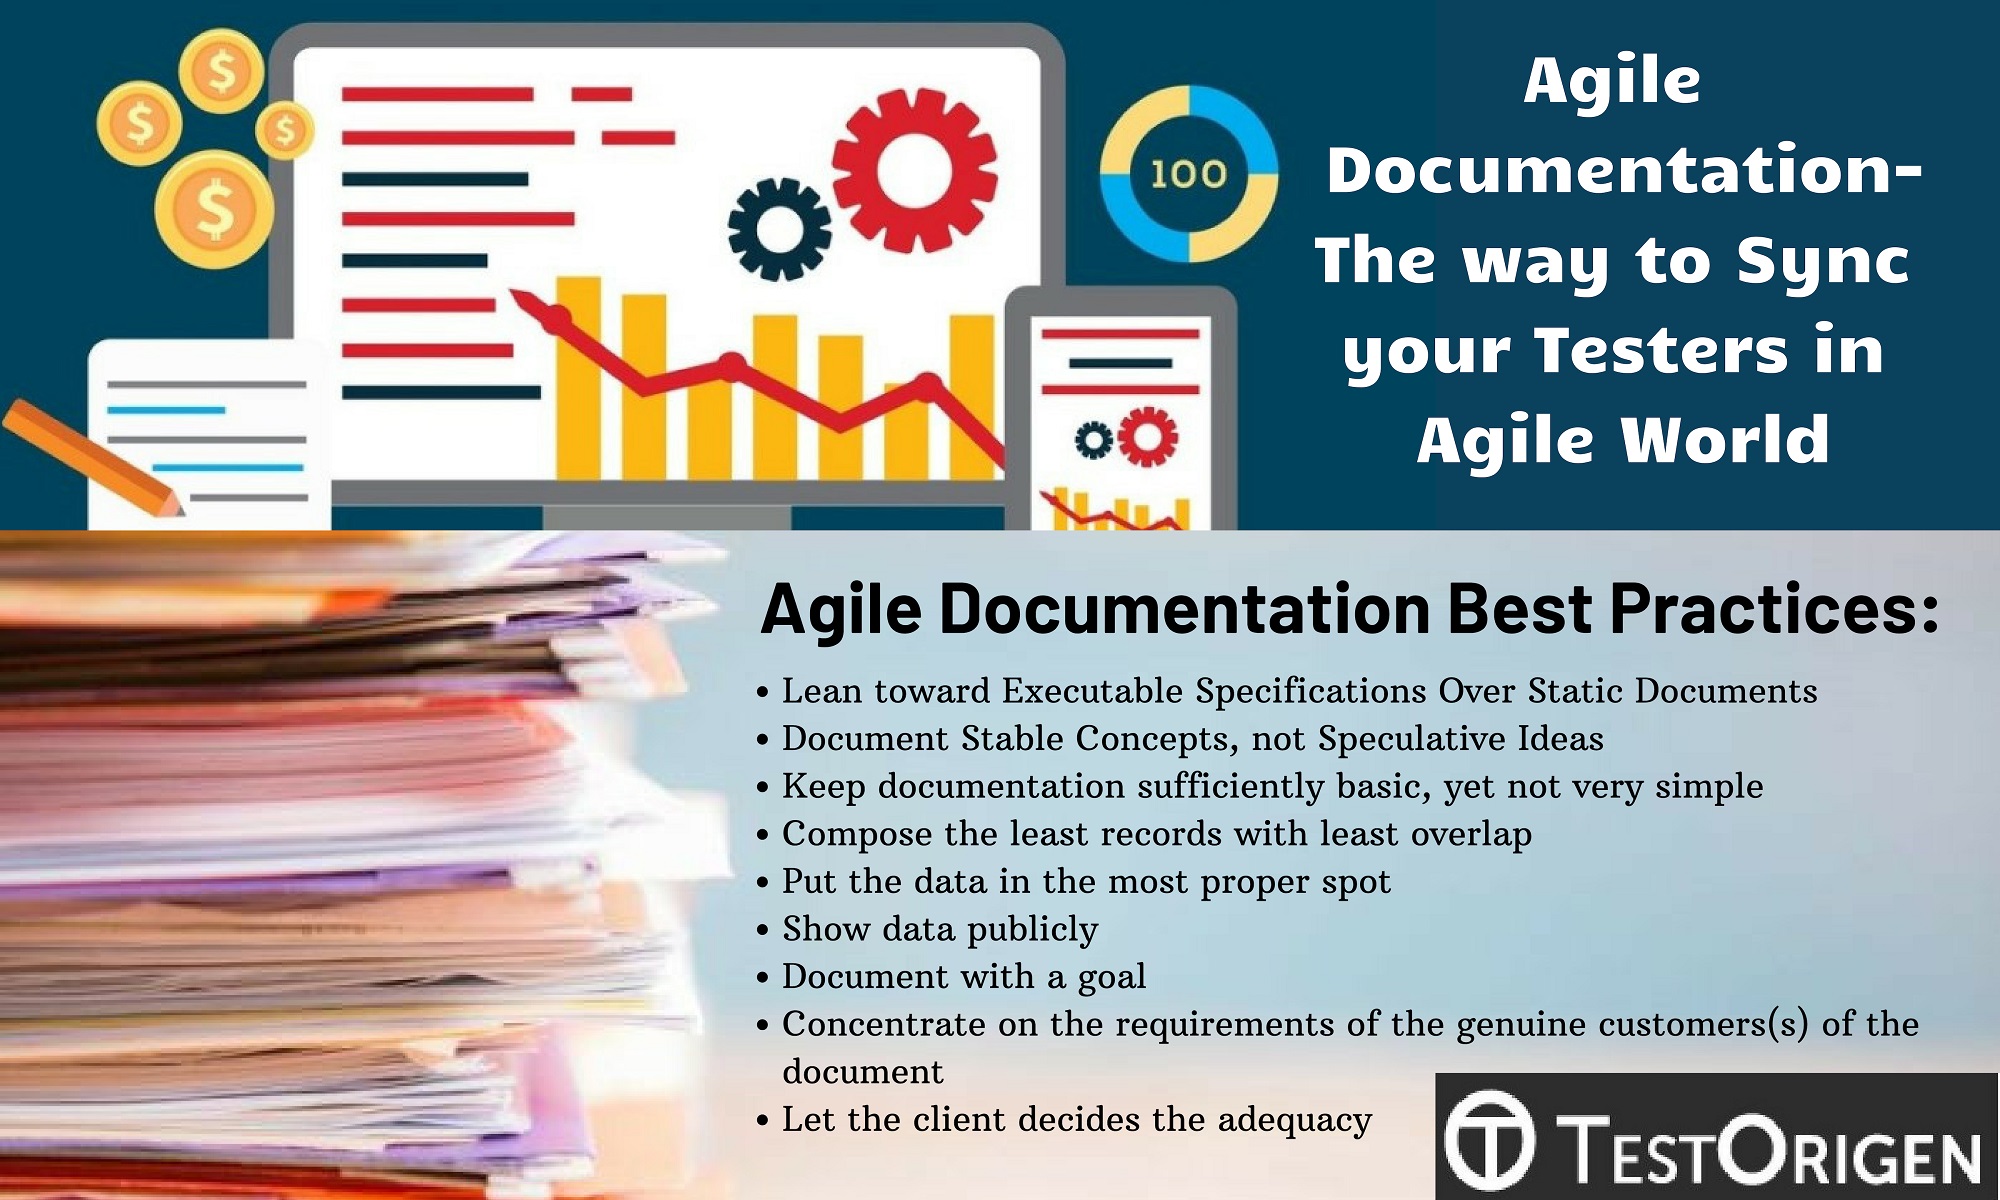 Agile Documentation-The way to Sync your Testers in Agile World